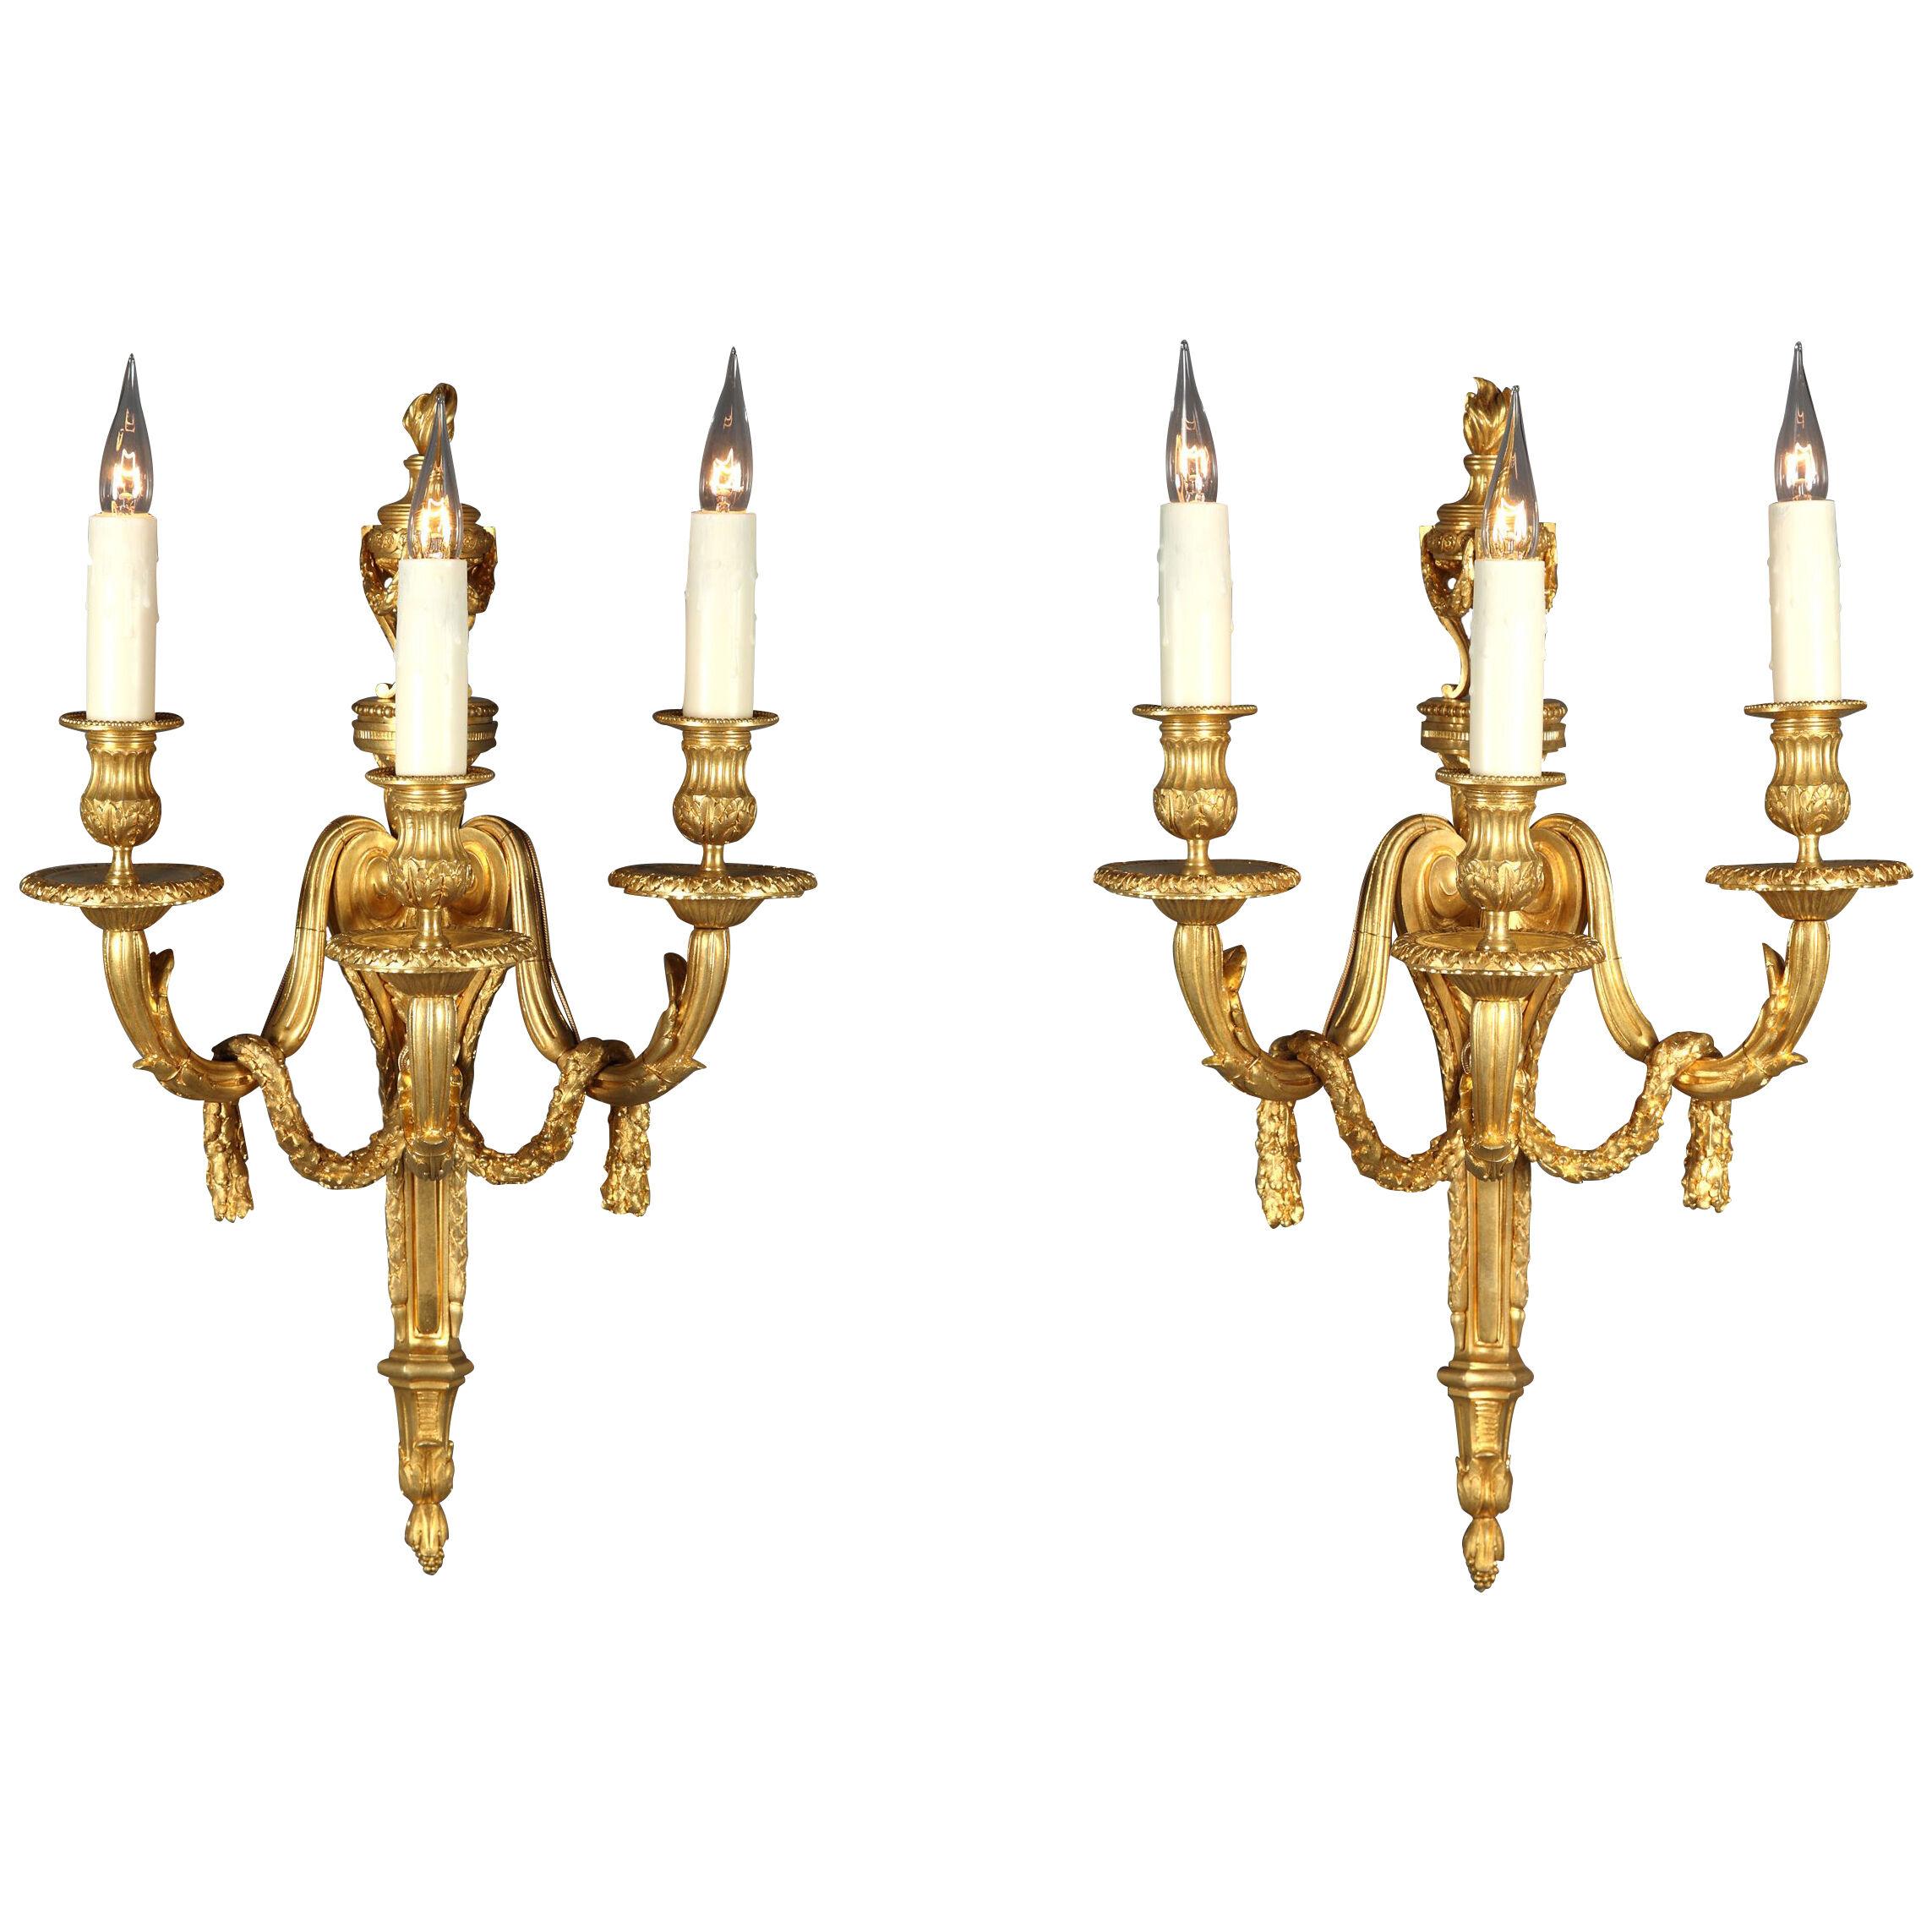 Fine Pair of Louis XVI Style Wall-Lights After J-C Delafosse, France, Circa 1880